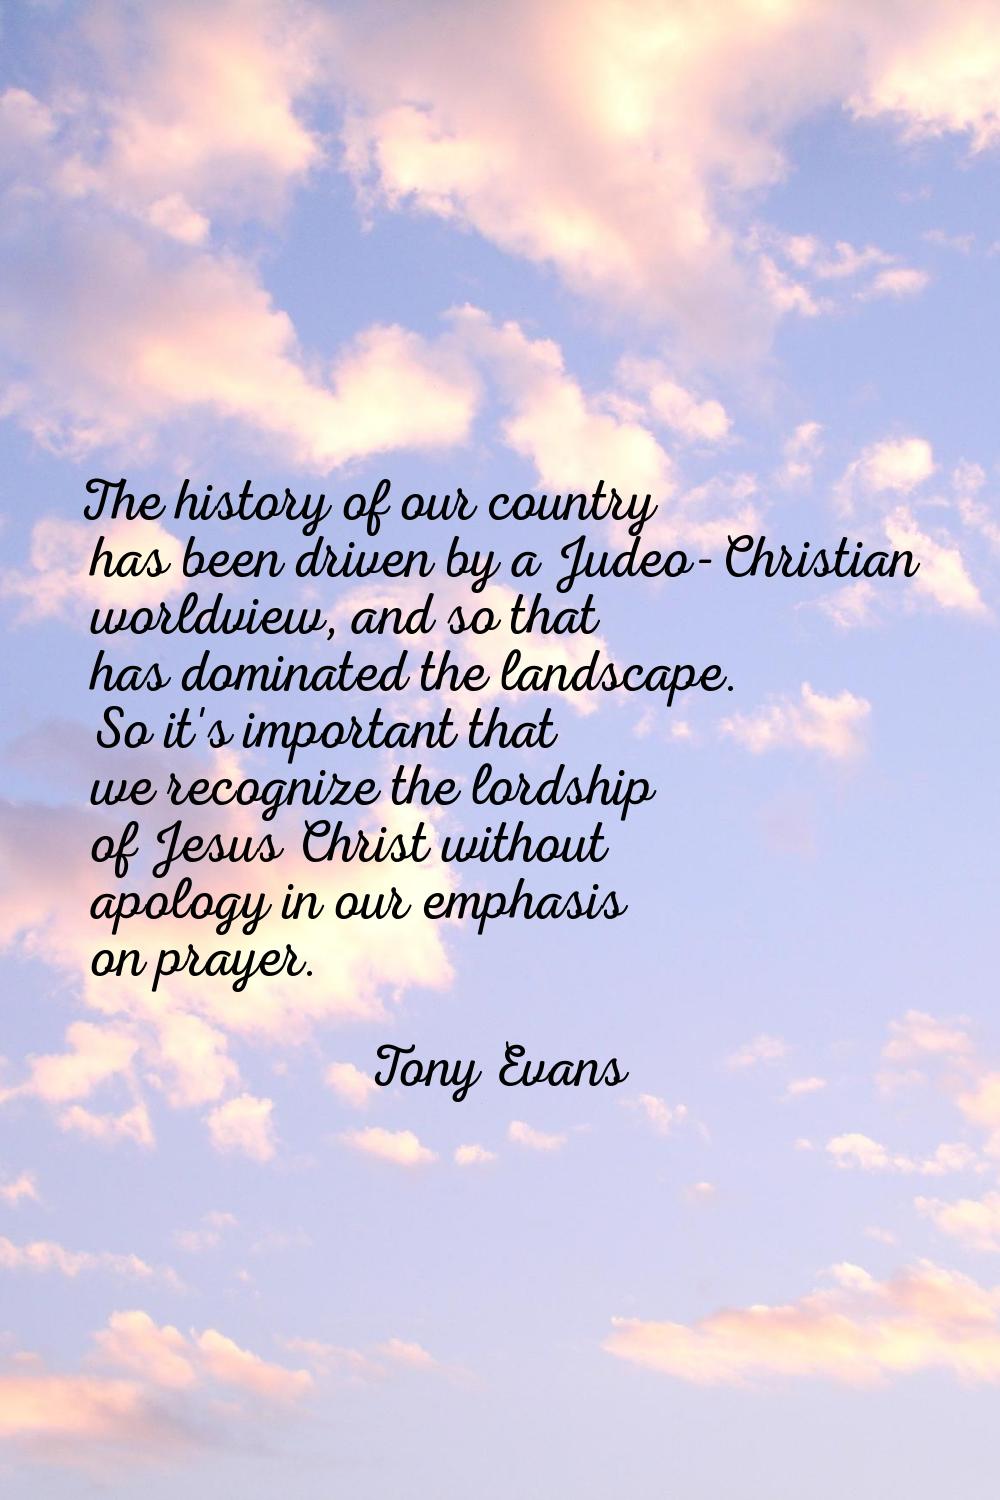 The history of our country has been driven by a Judeo-Christian worldview, and so that has dominate